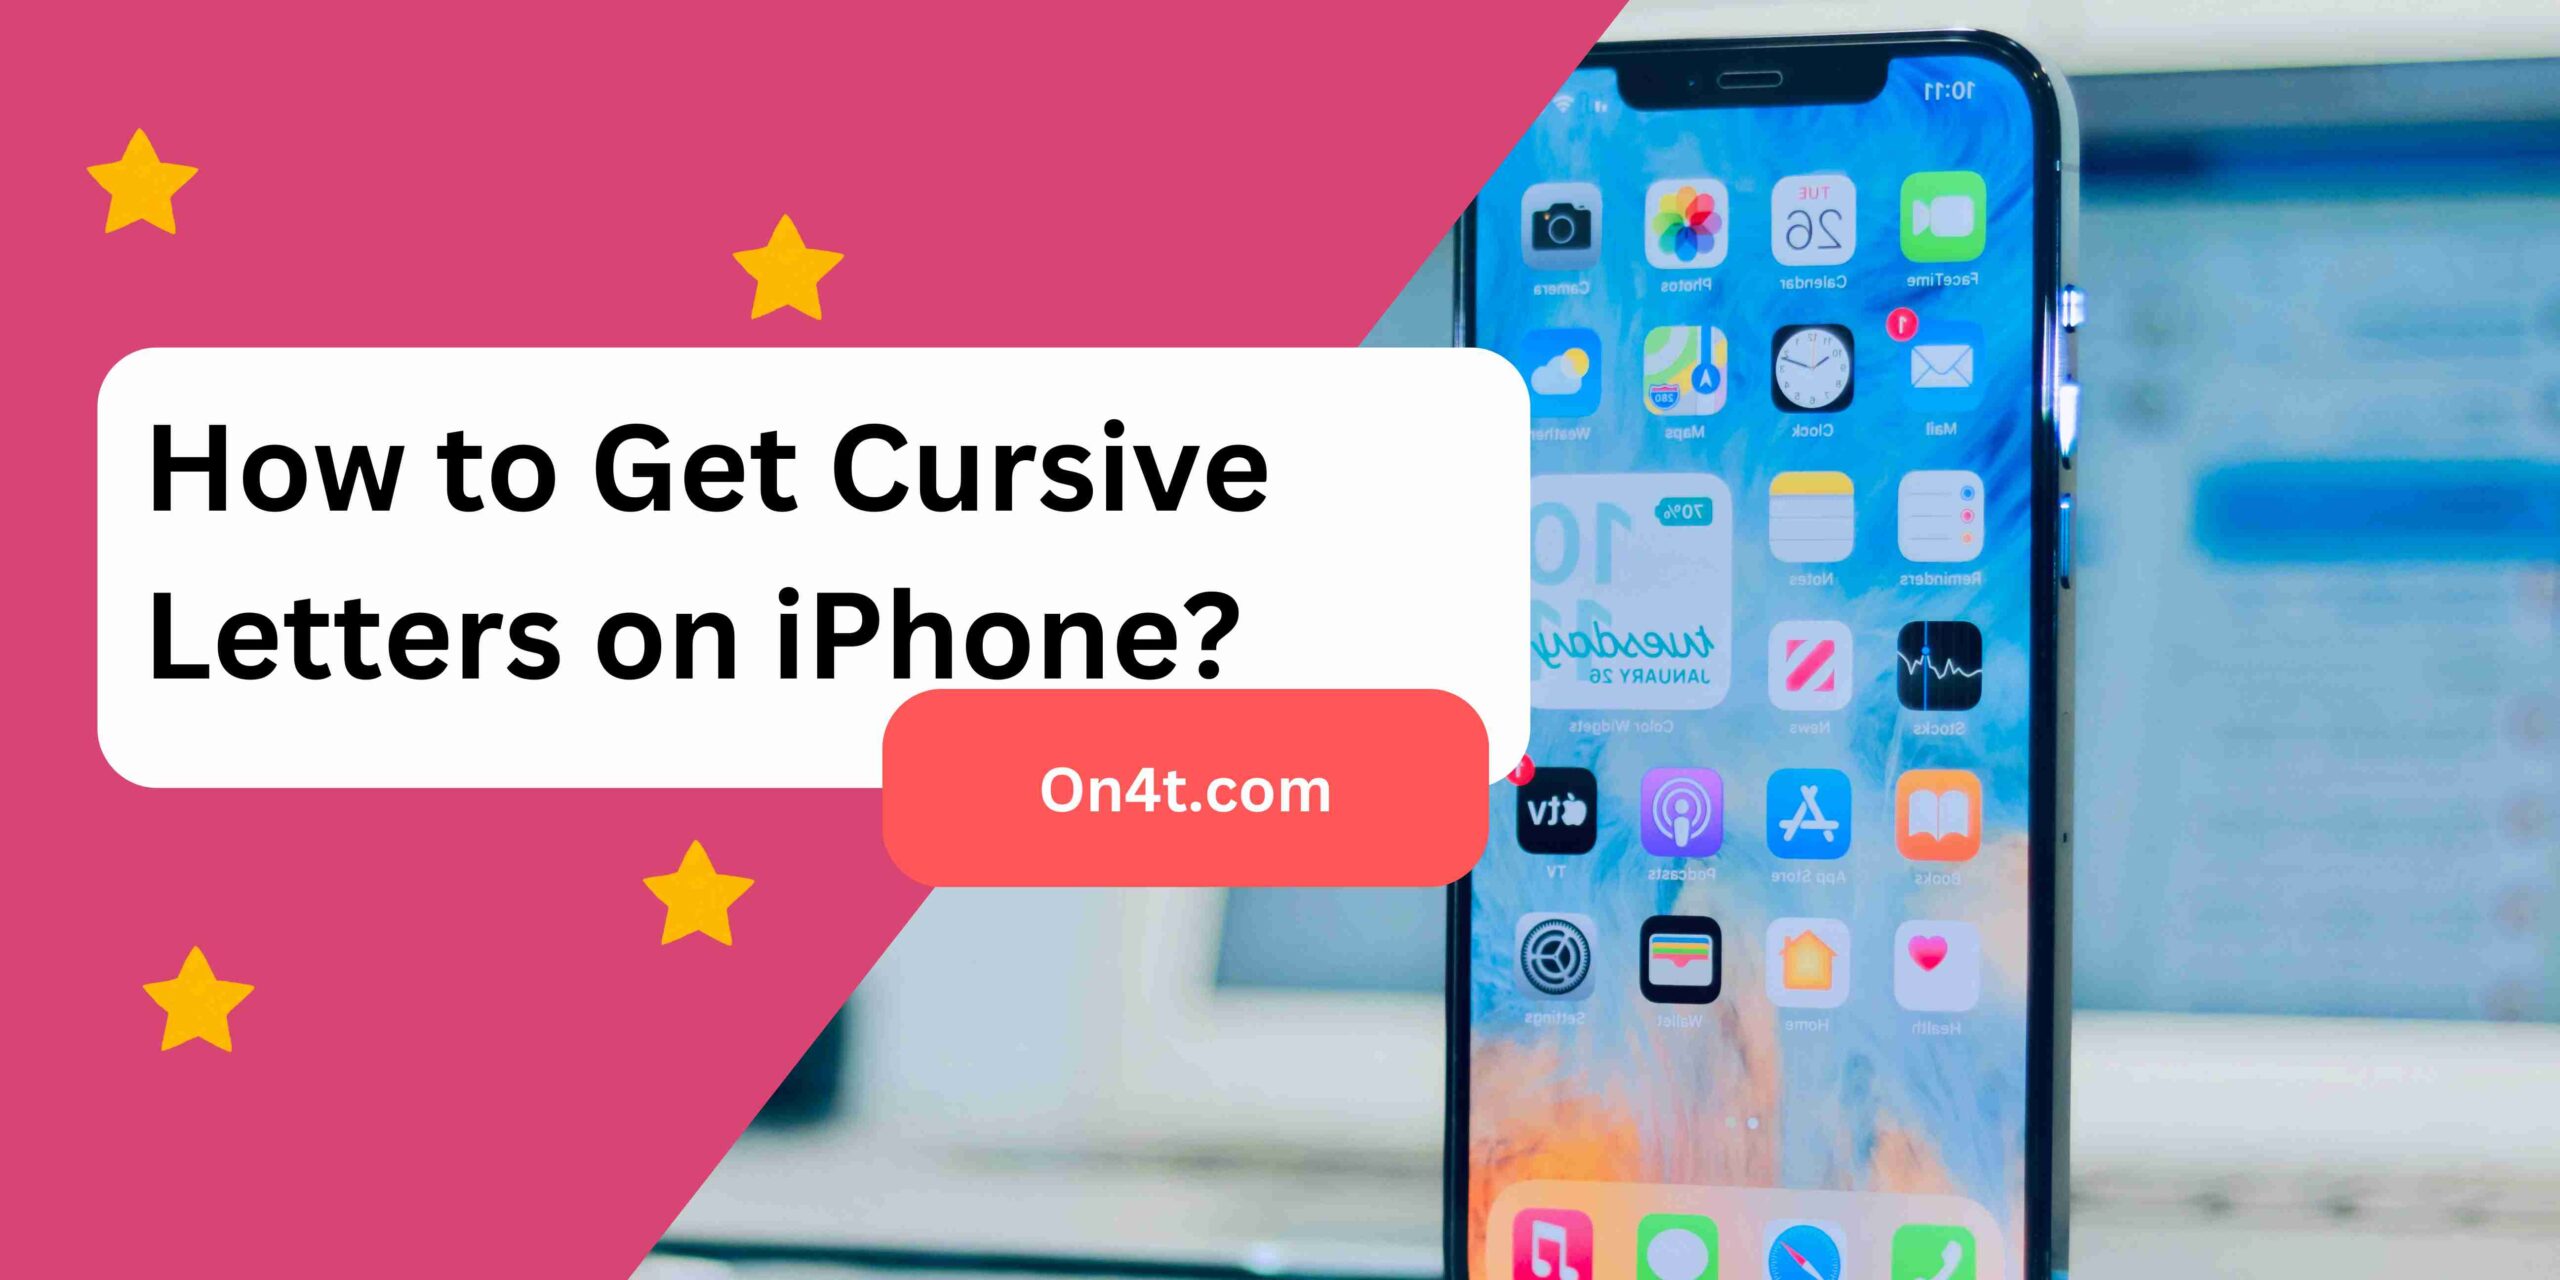 How to Get Cursive Letters on iPhone?